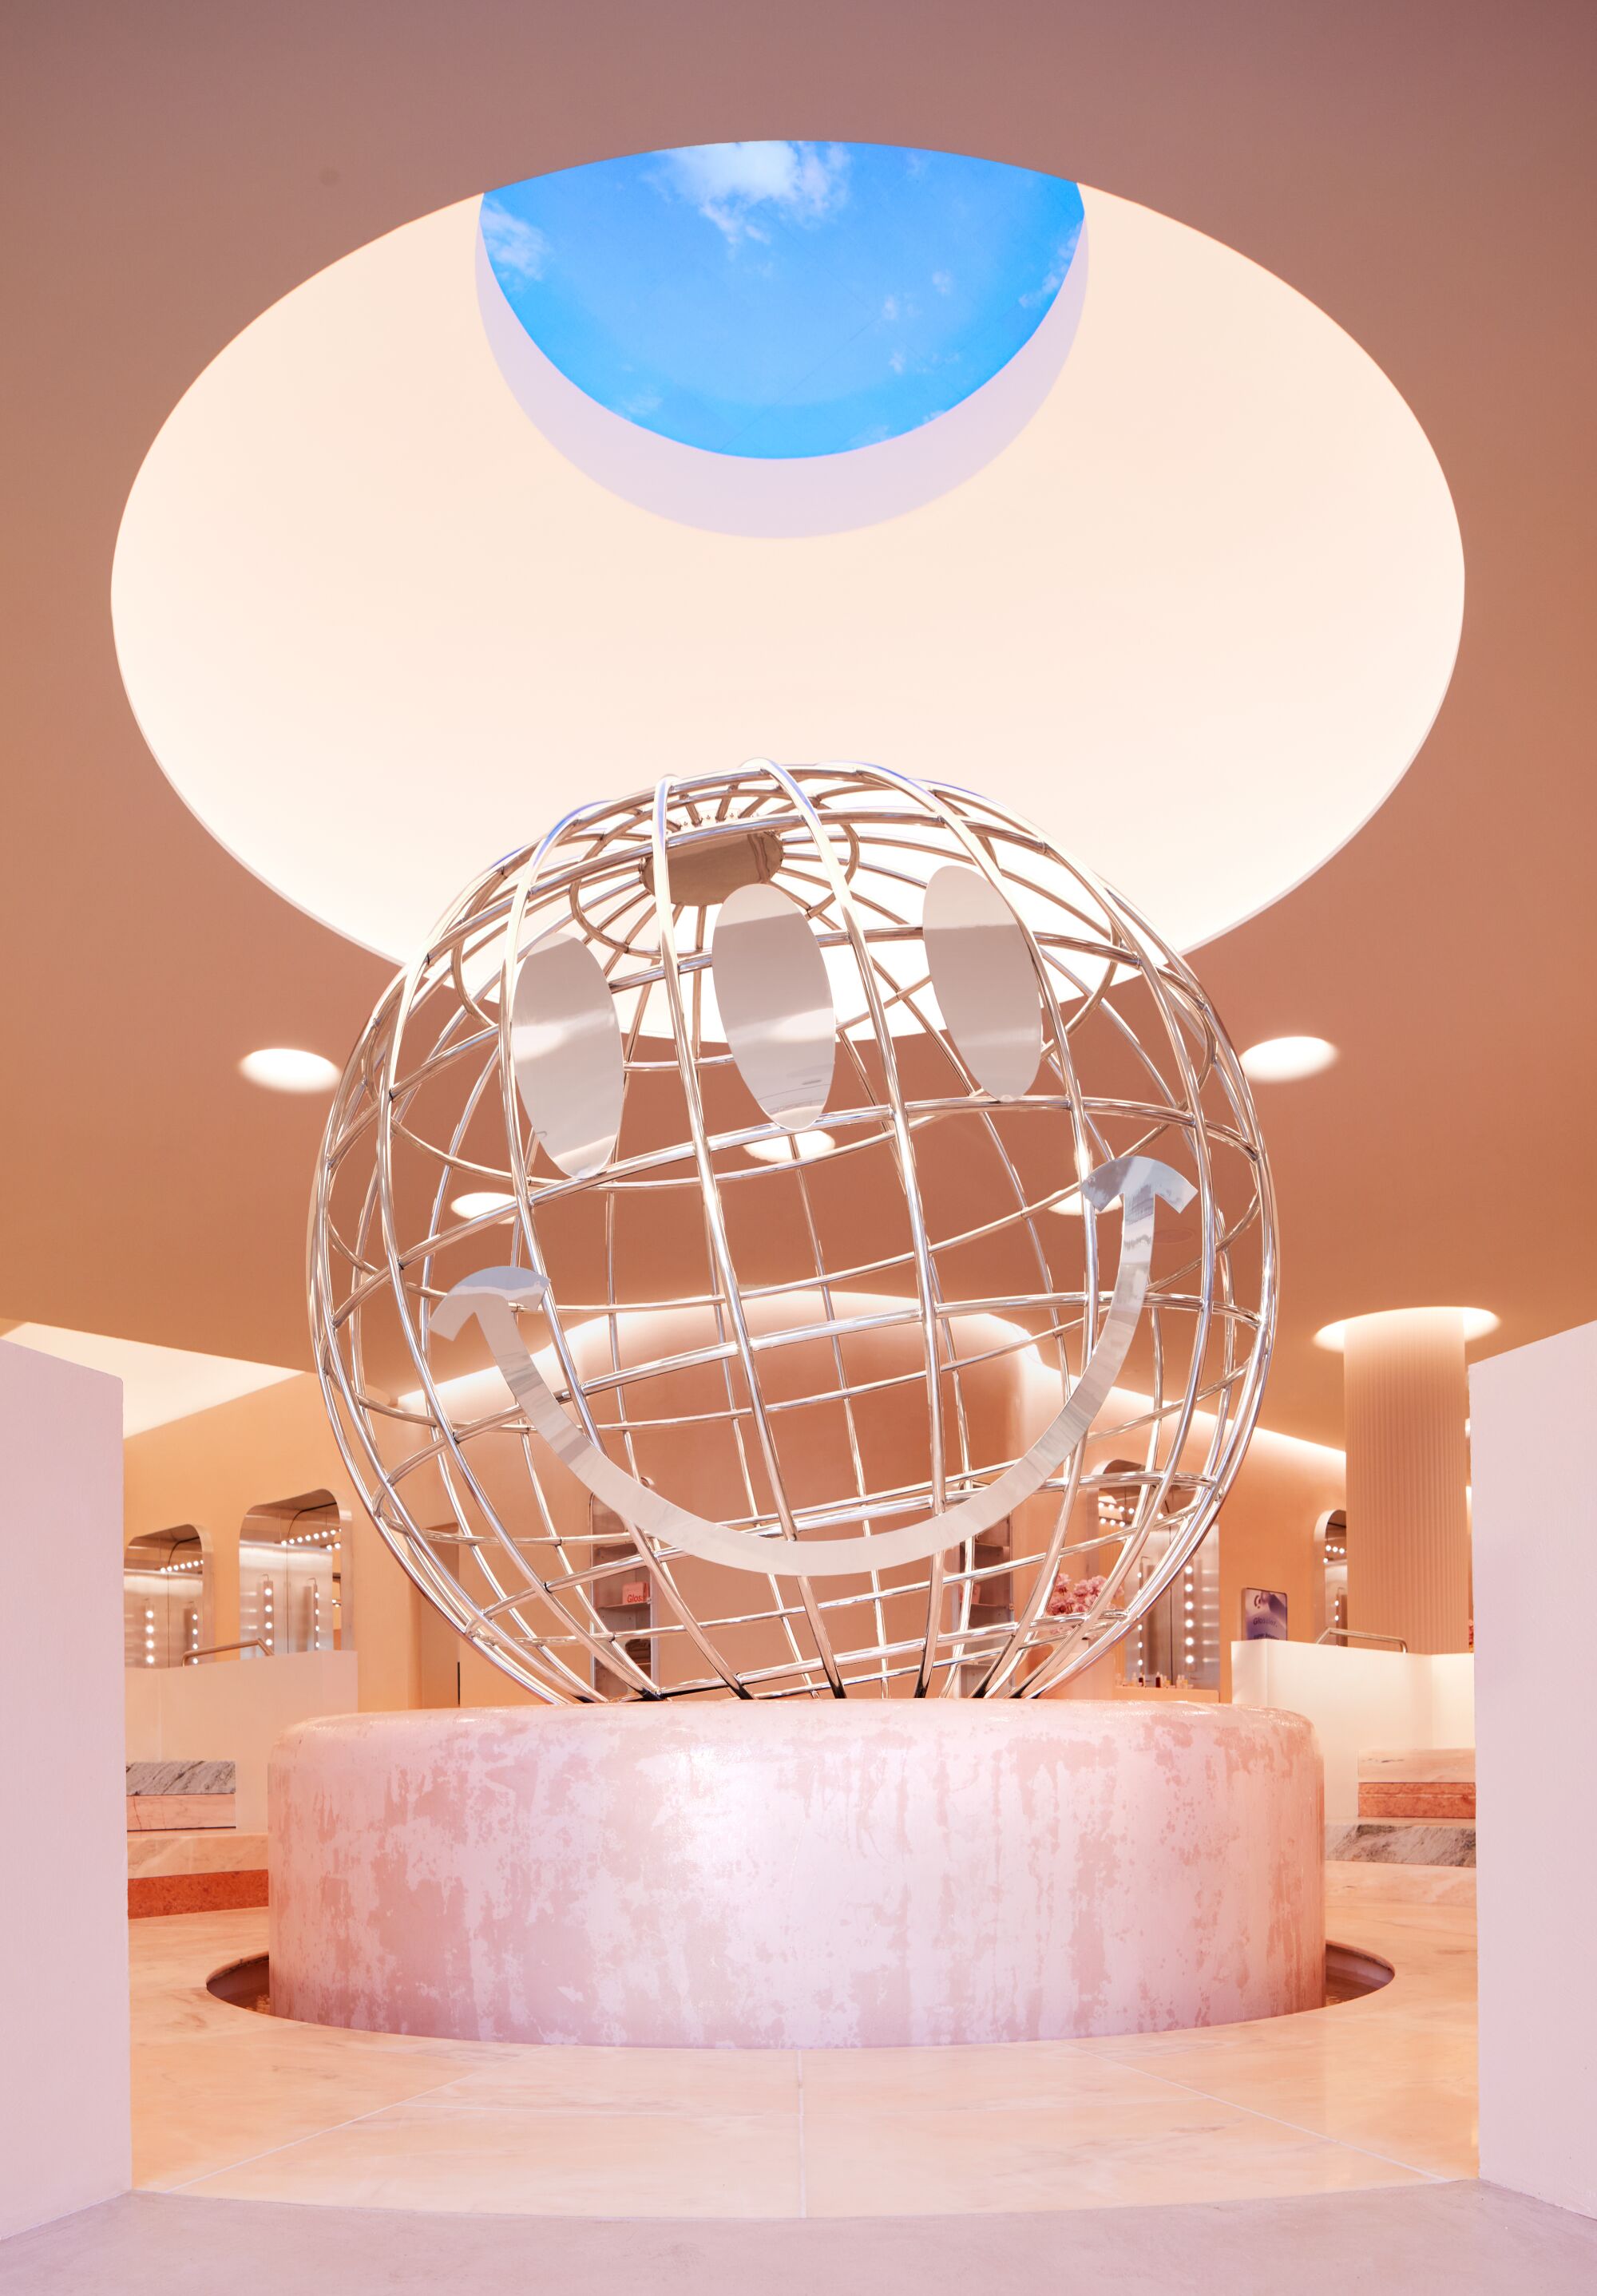 A metal globe under a dome ceiling.